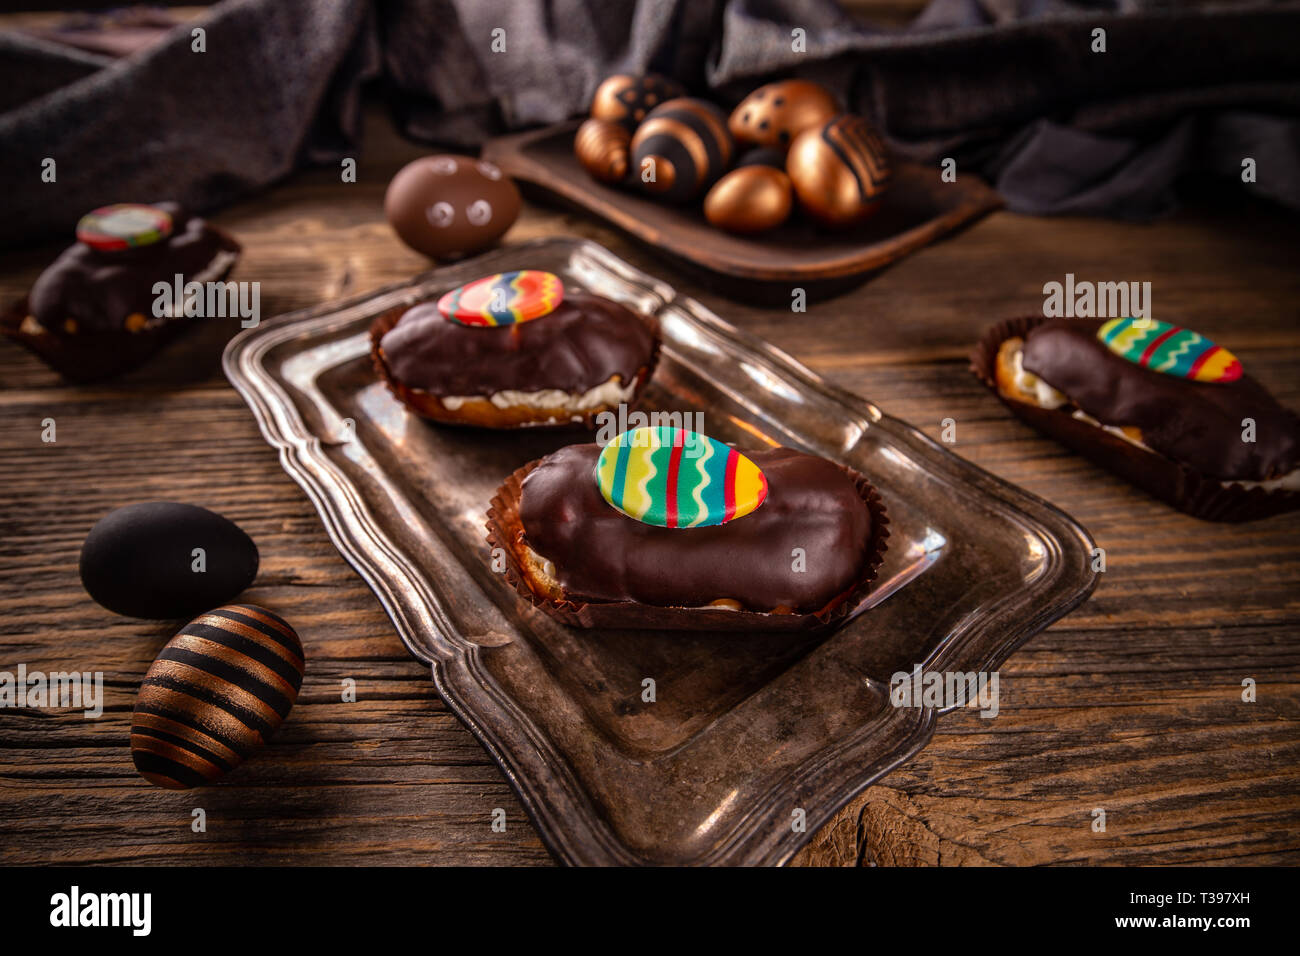 Eclairs with chocolate ganache and Easter decoration Stock Photo